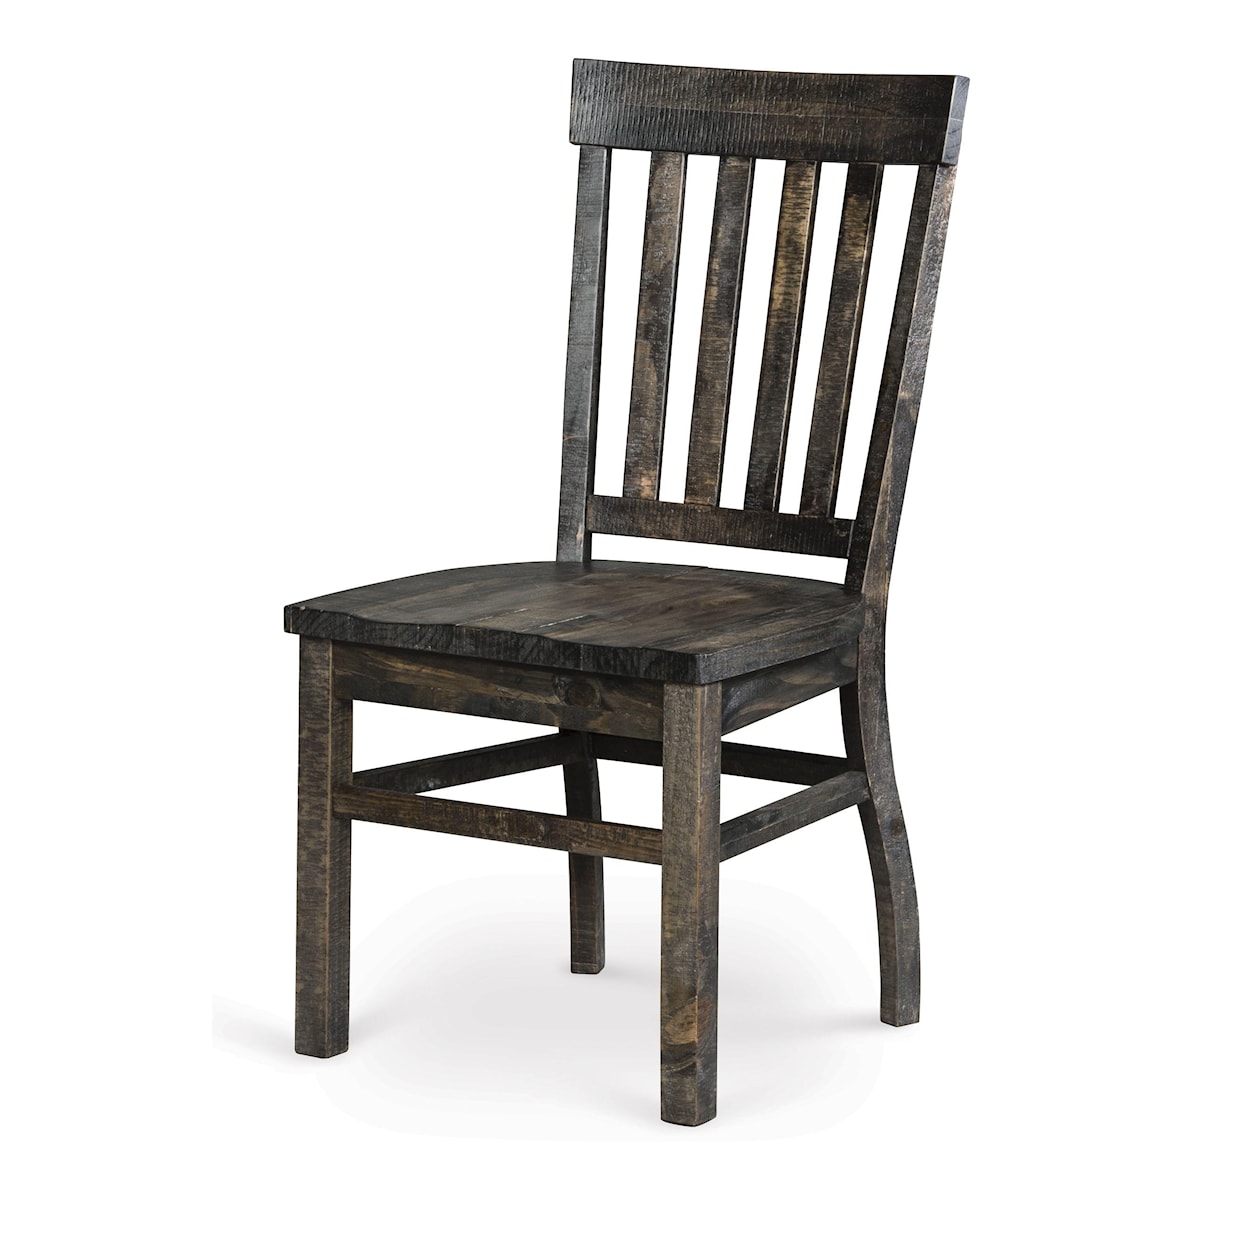 Magnussen Home Turnin Dining Chair